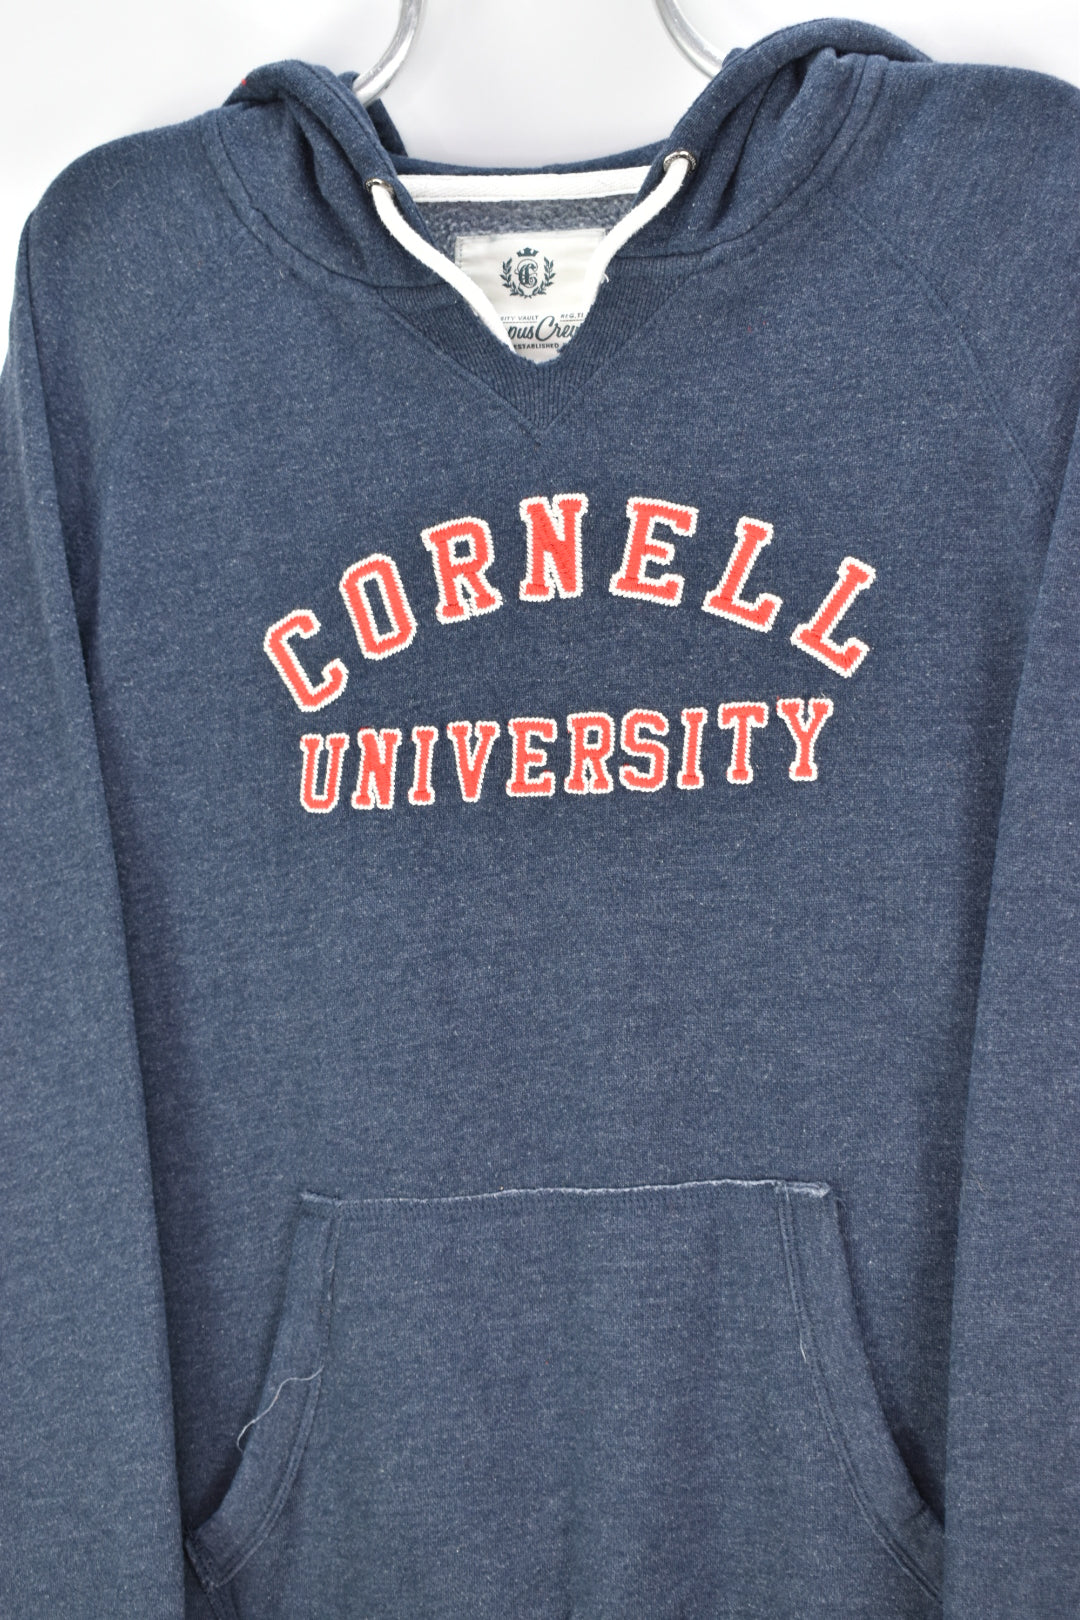 VINTAGE WOMEN'S CORNELL UNIVERSITY EMBROIDERED HOODIE | LARGE COLLEGE